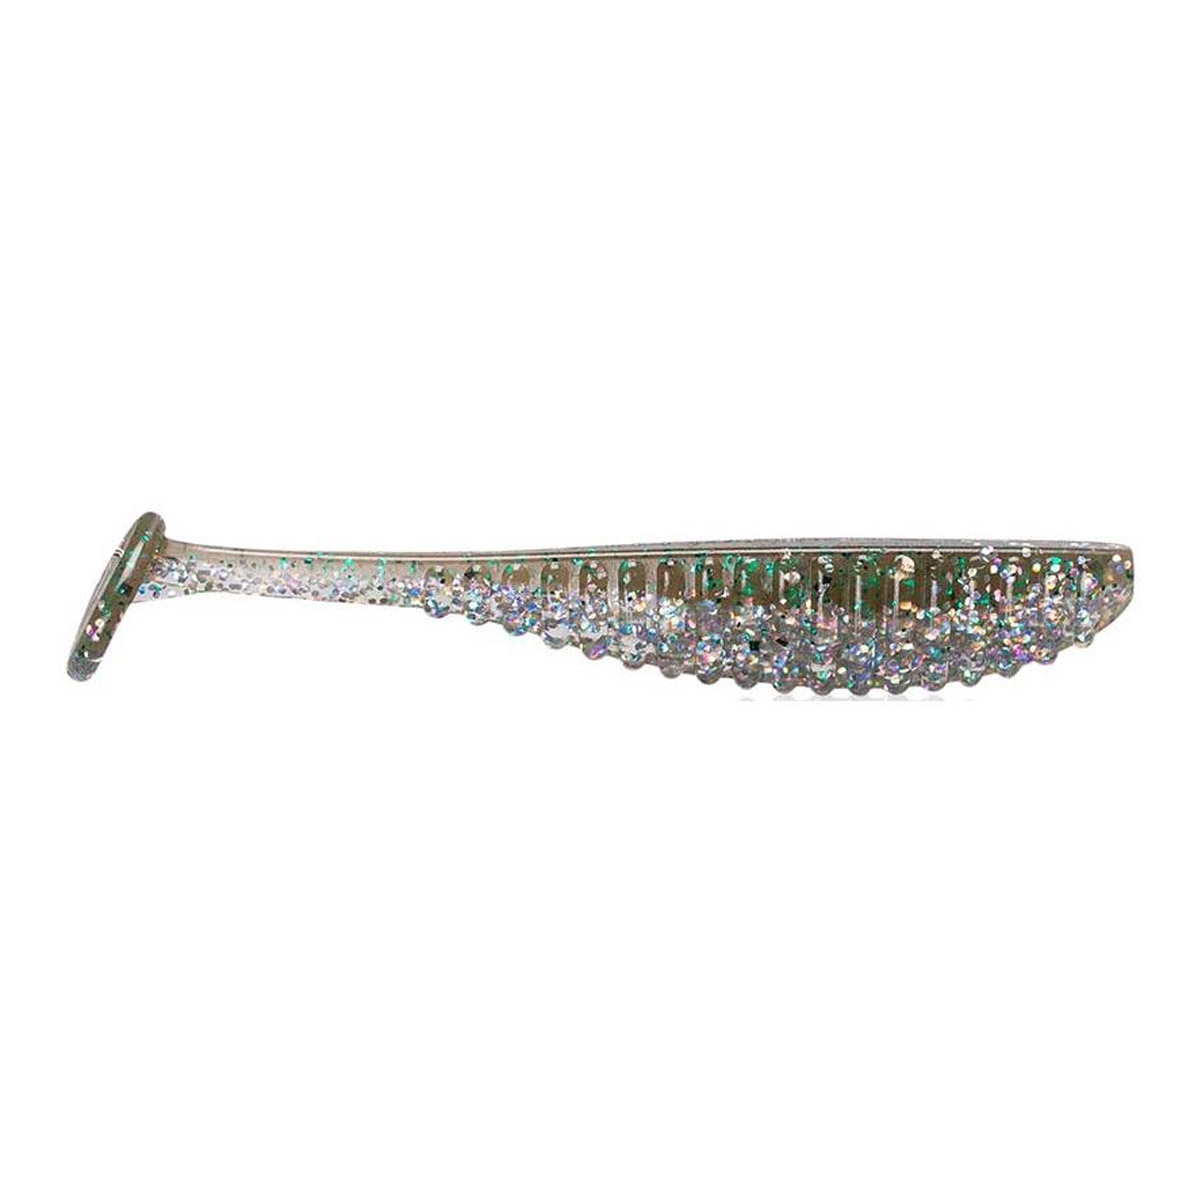 Reins S-Cape Shad 3.5 Inch -  West Coast Phase 1